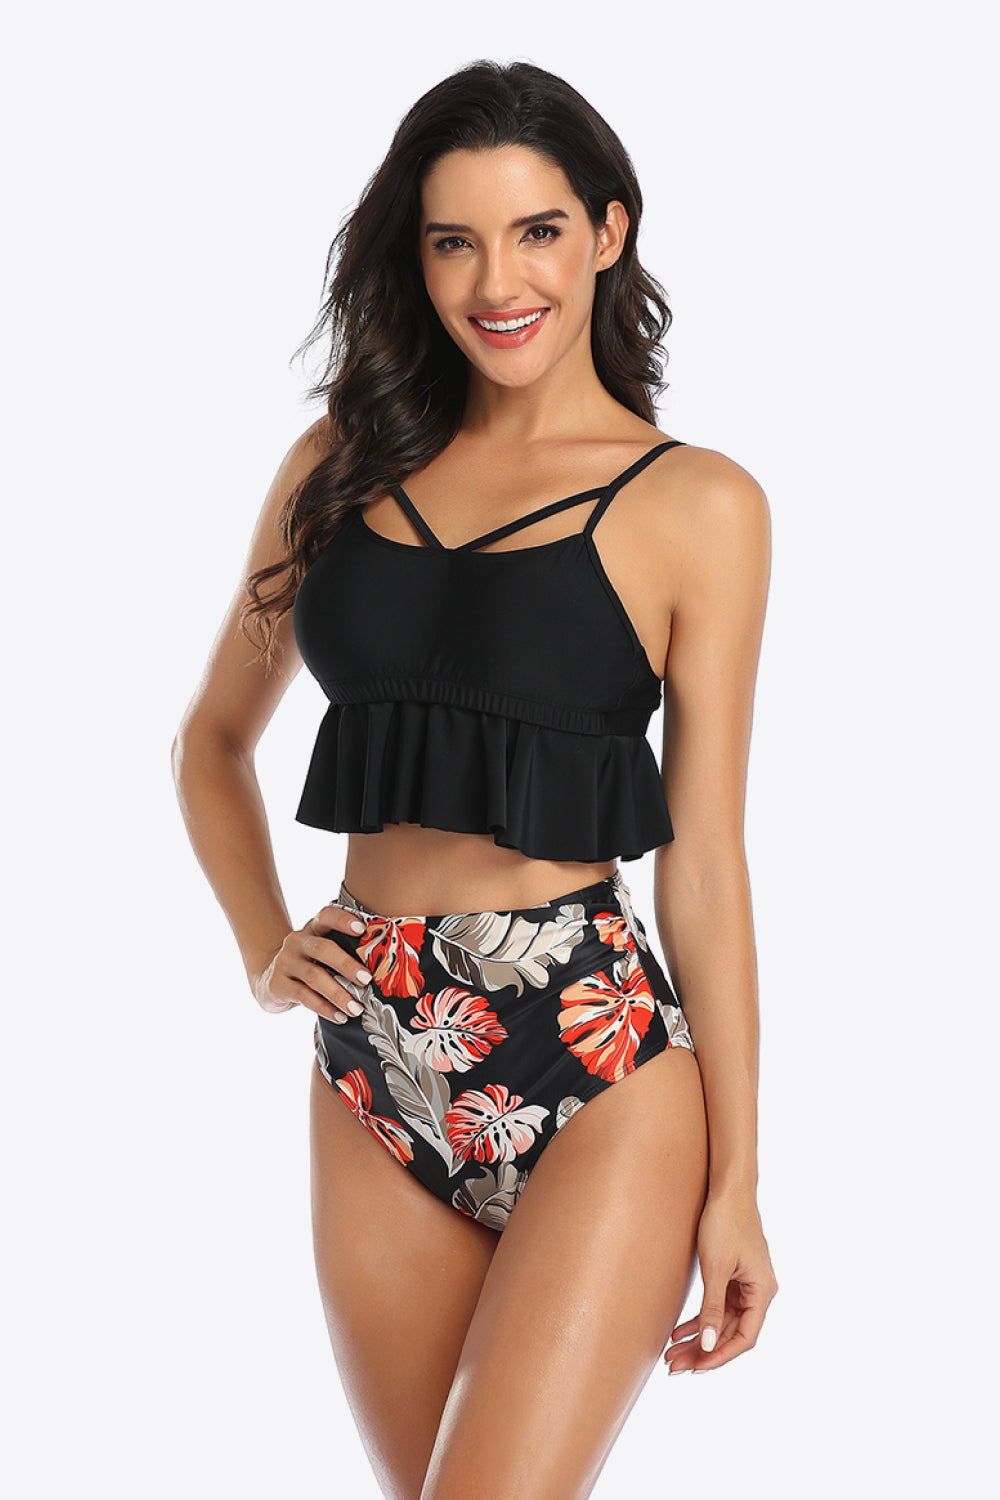 Dive into style with our Tropical Print Ruffled Two-Piece Swimsuit. Perfect fit, vibrant colors, and ultimate comfort for your sunny getaways.